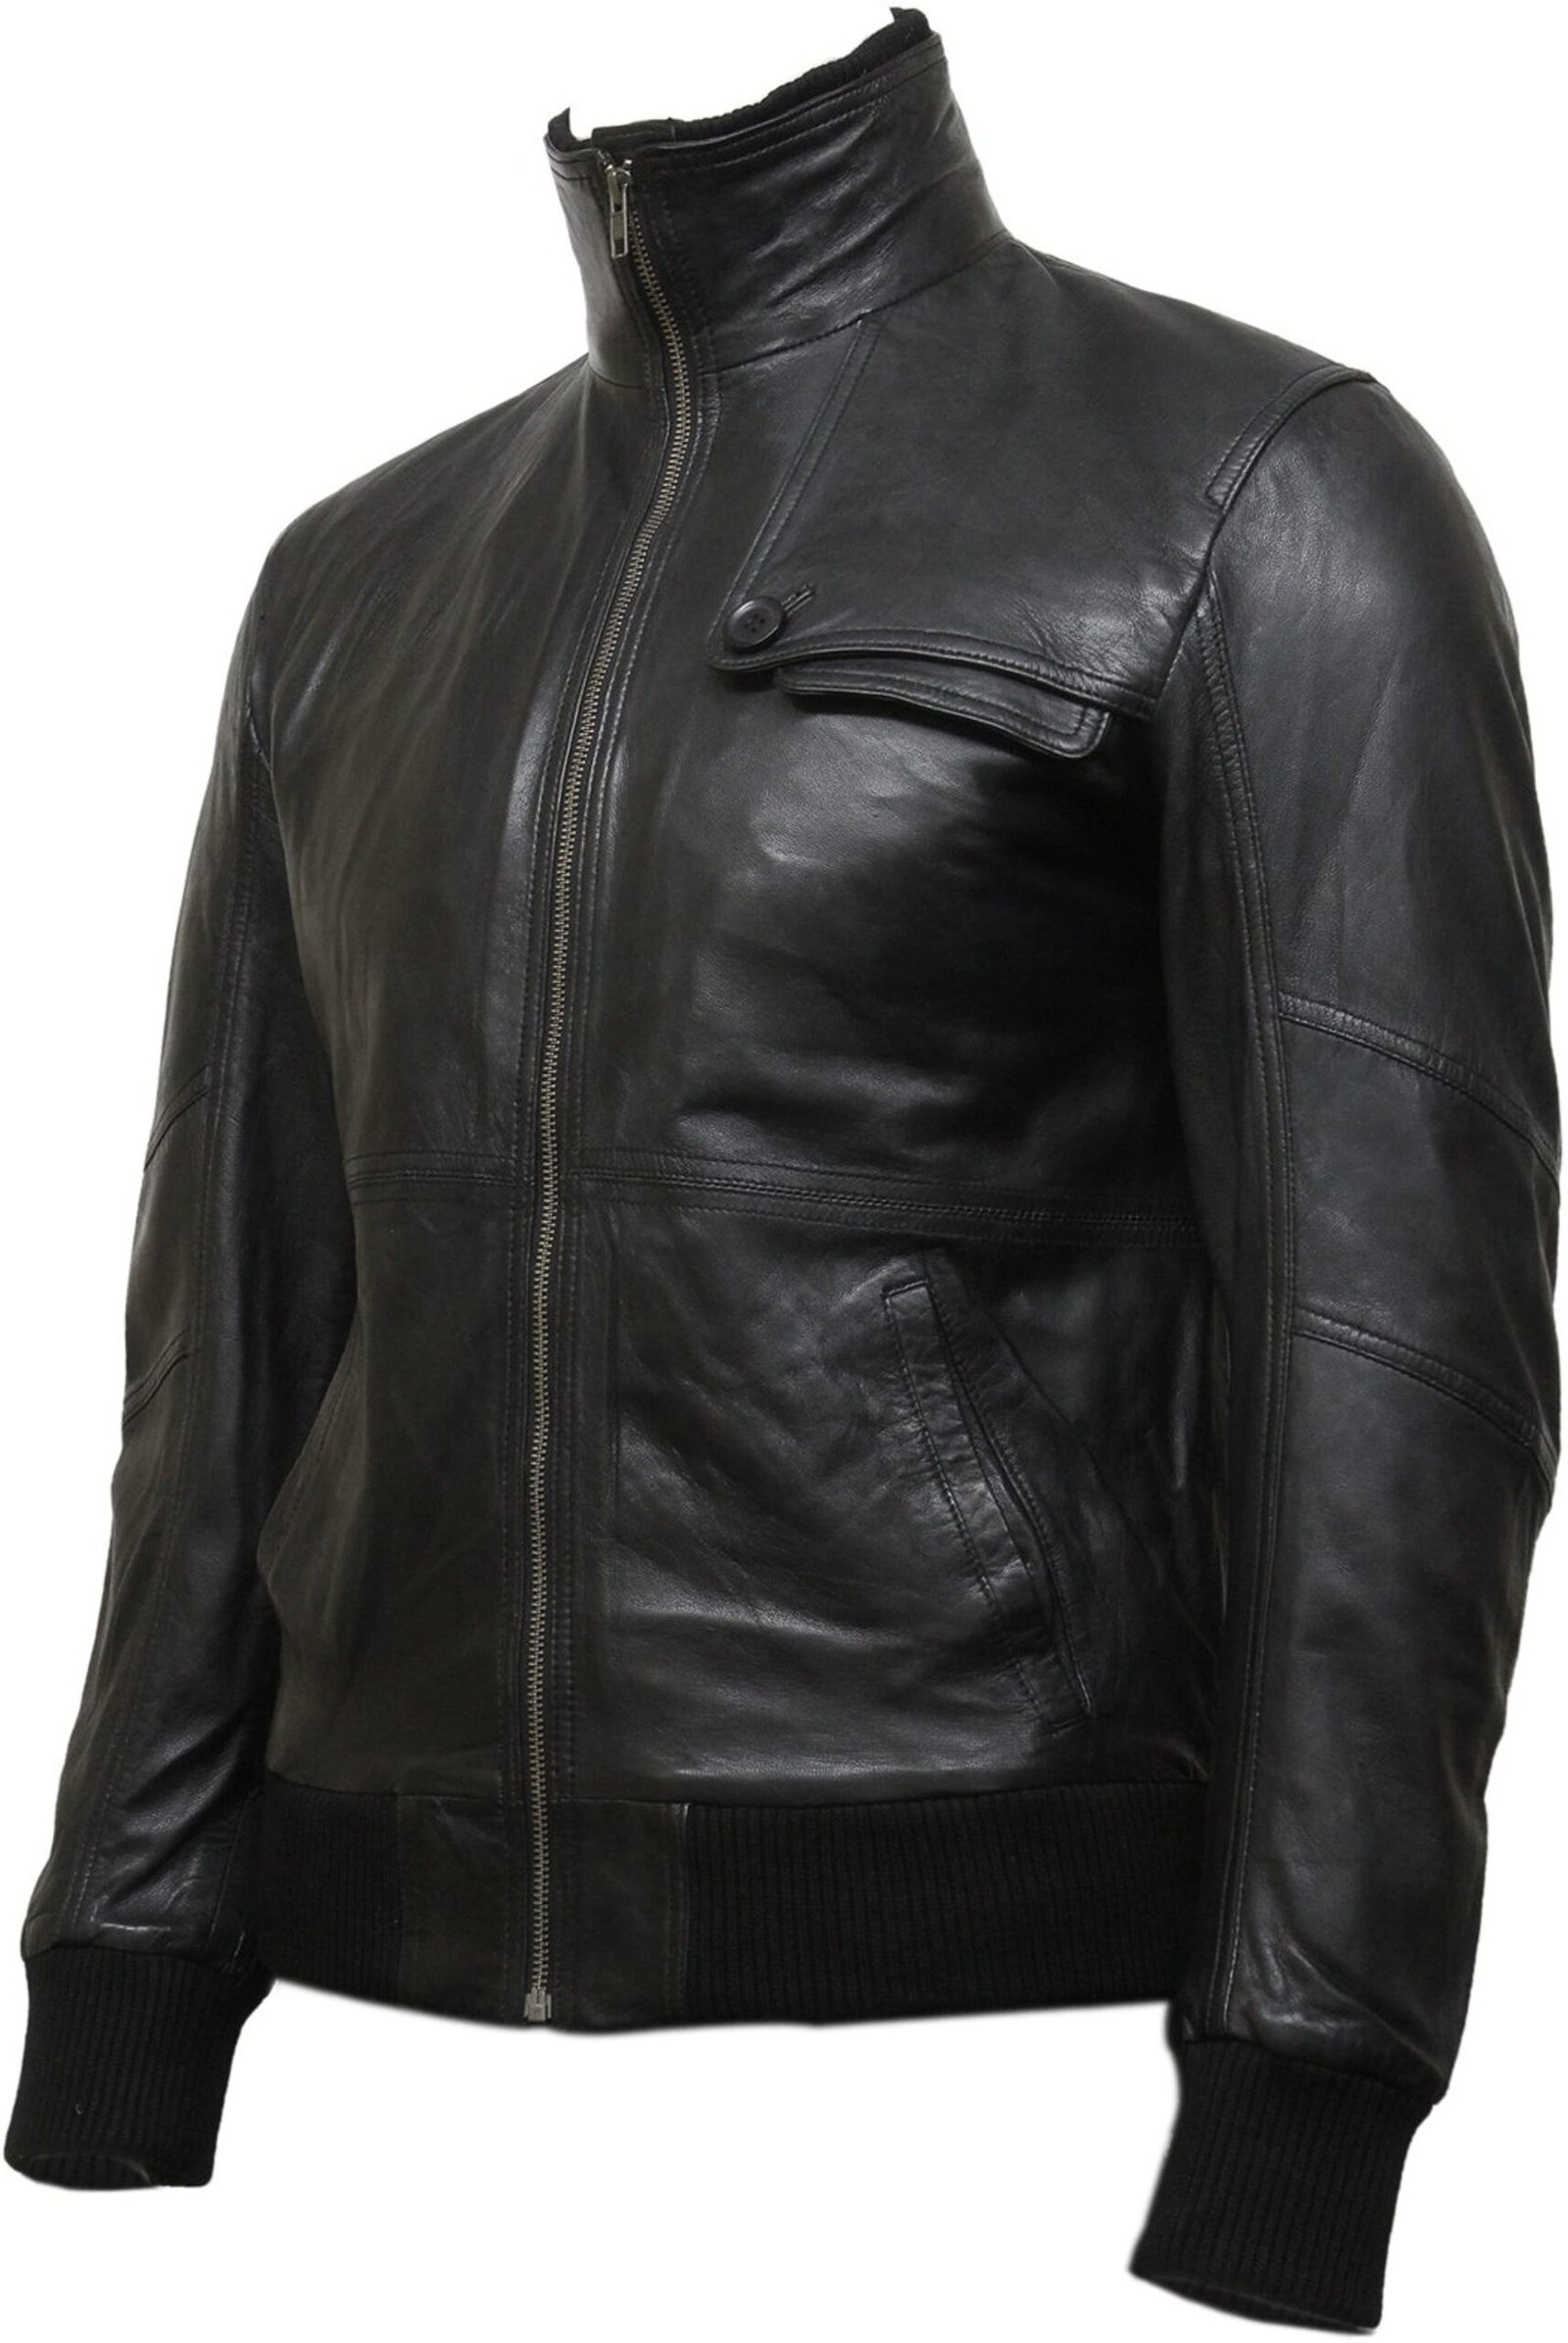 Mens Classic Casual Fitted Black Leather Jacket